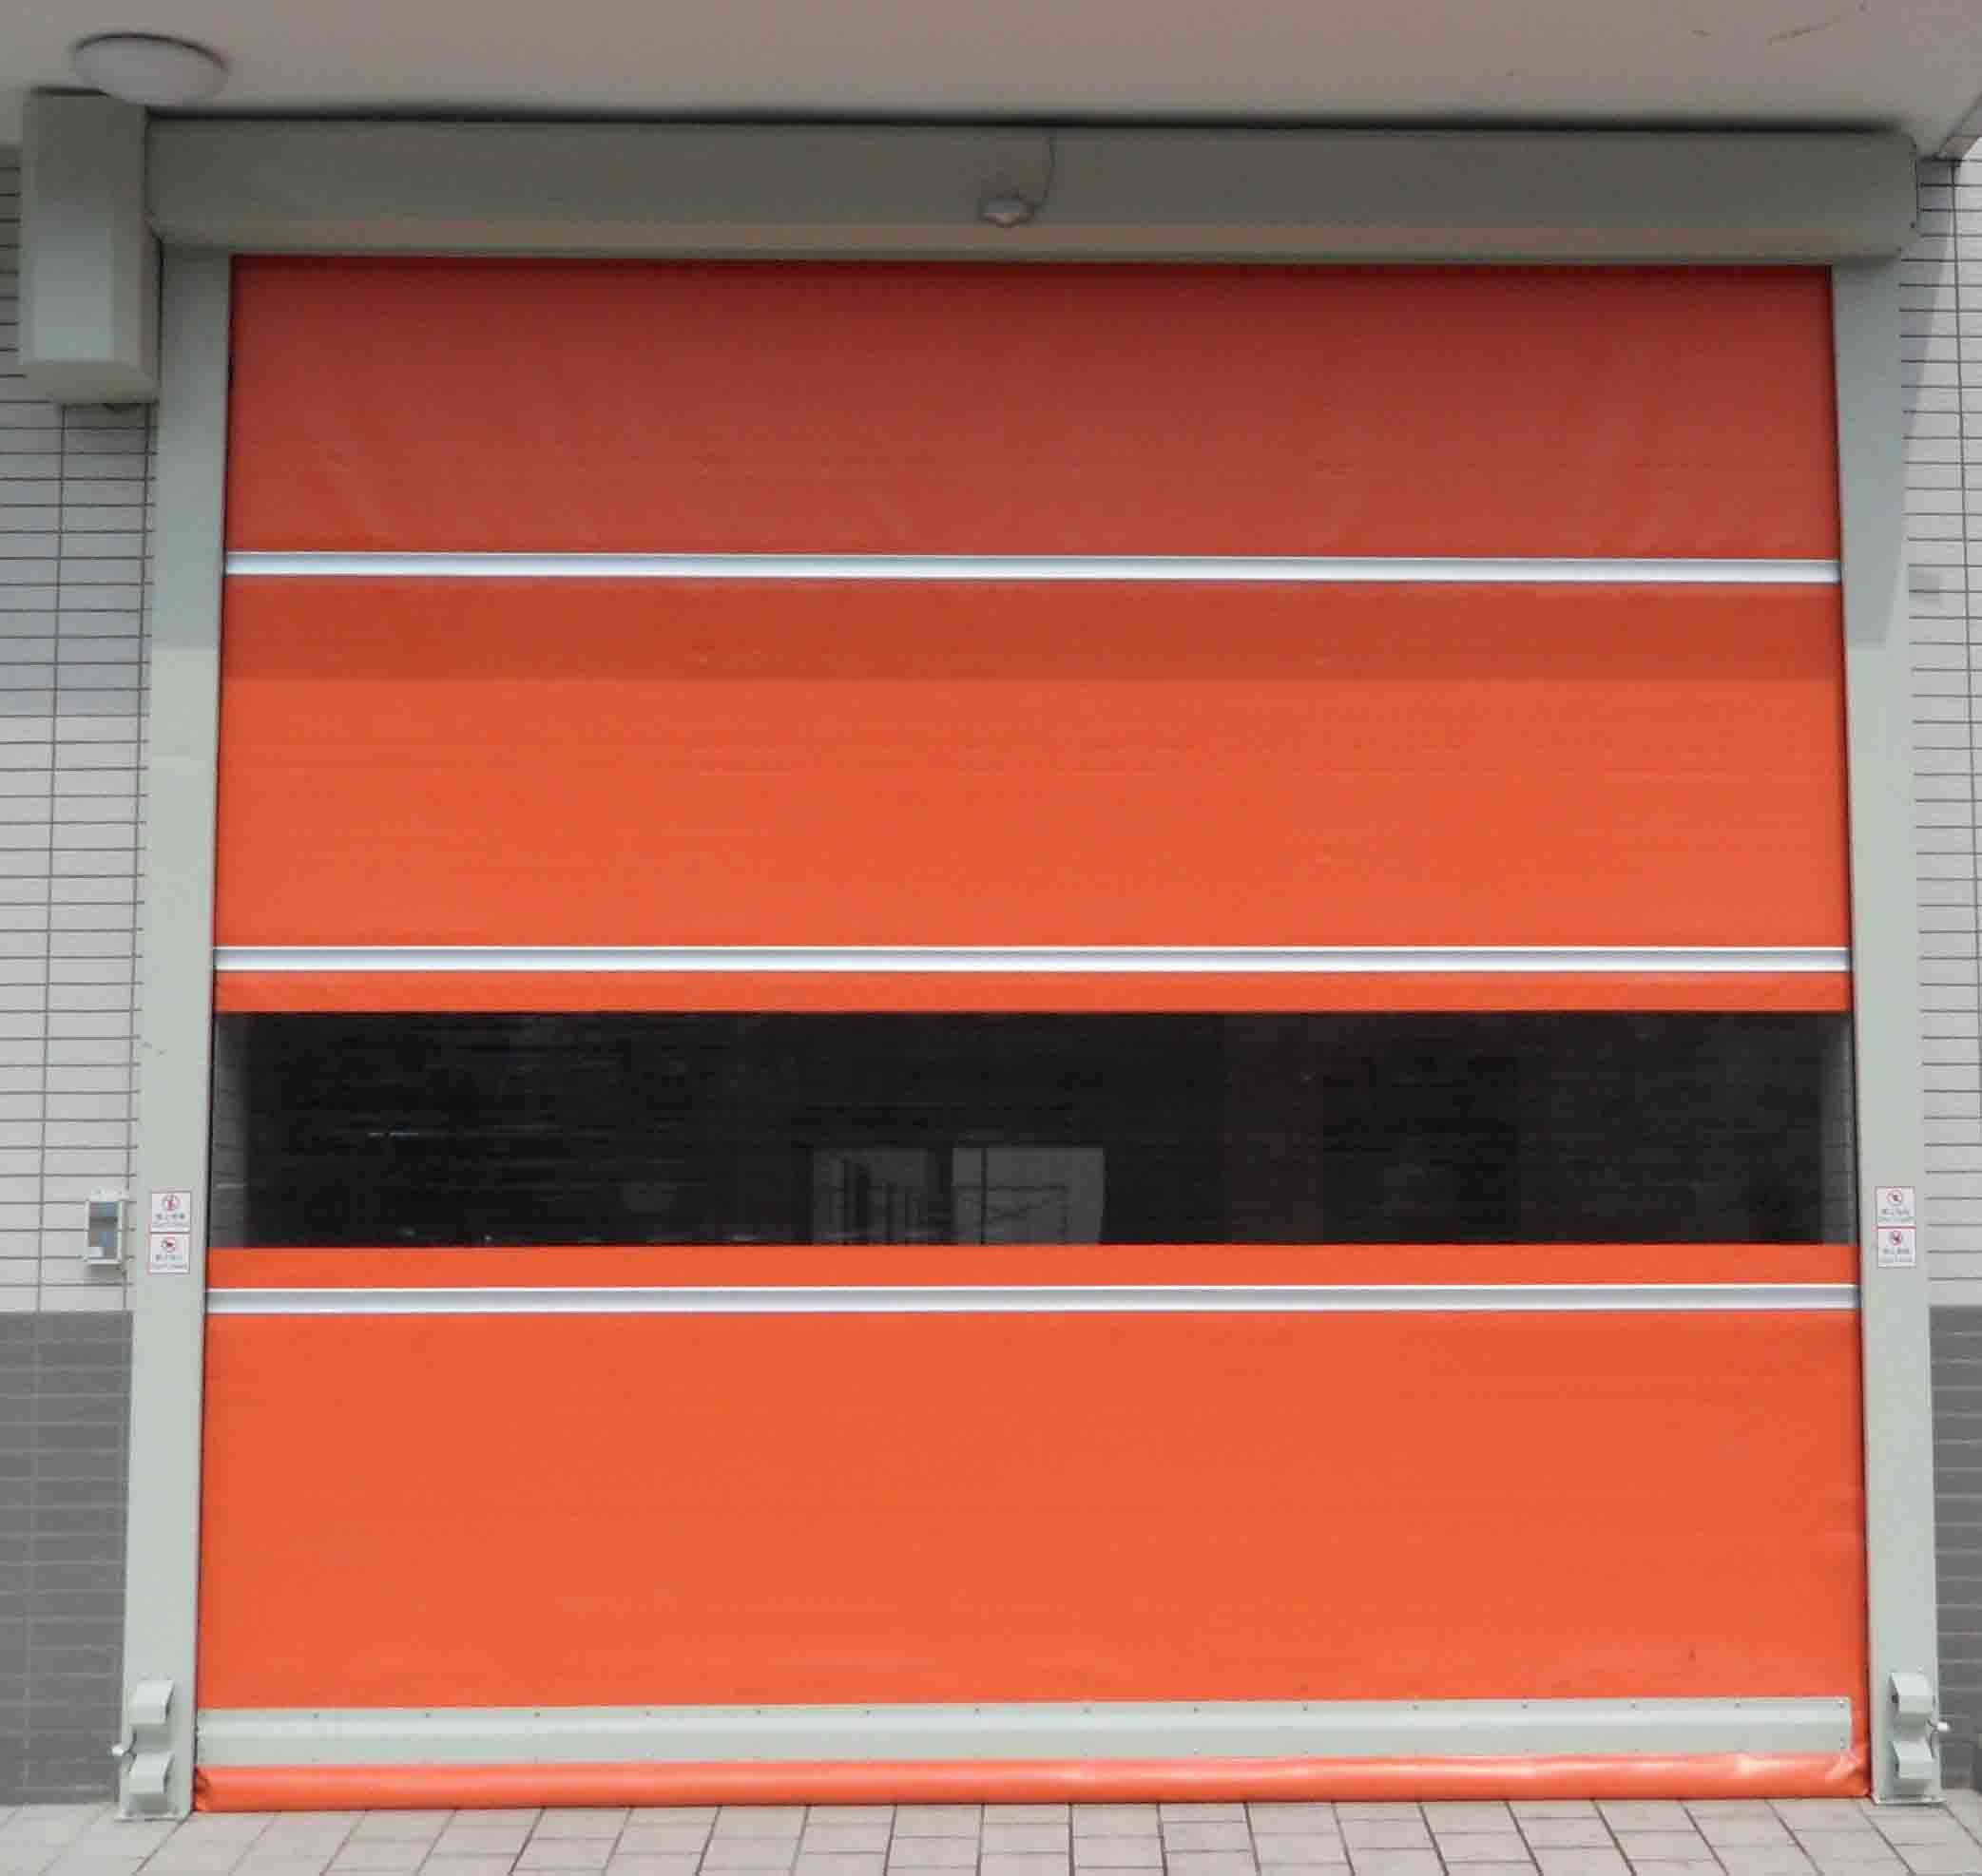 Safety PVC Warehouse Sanitary Dust Proof High Speed Rolling Fast Door Shutter